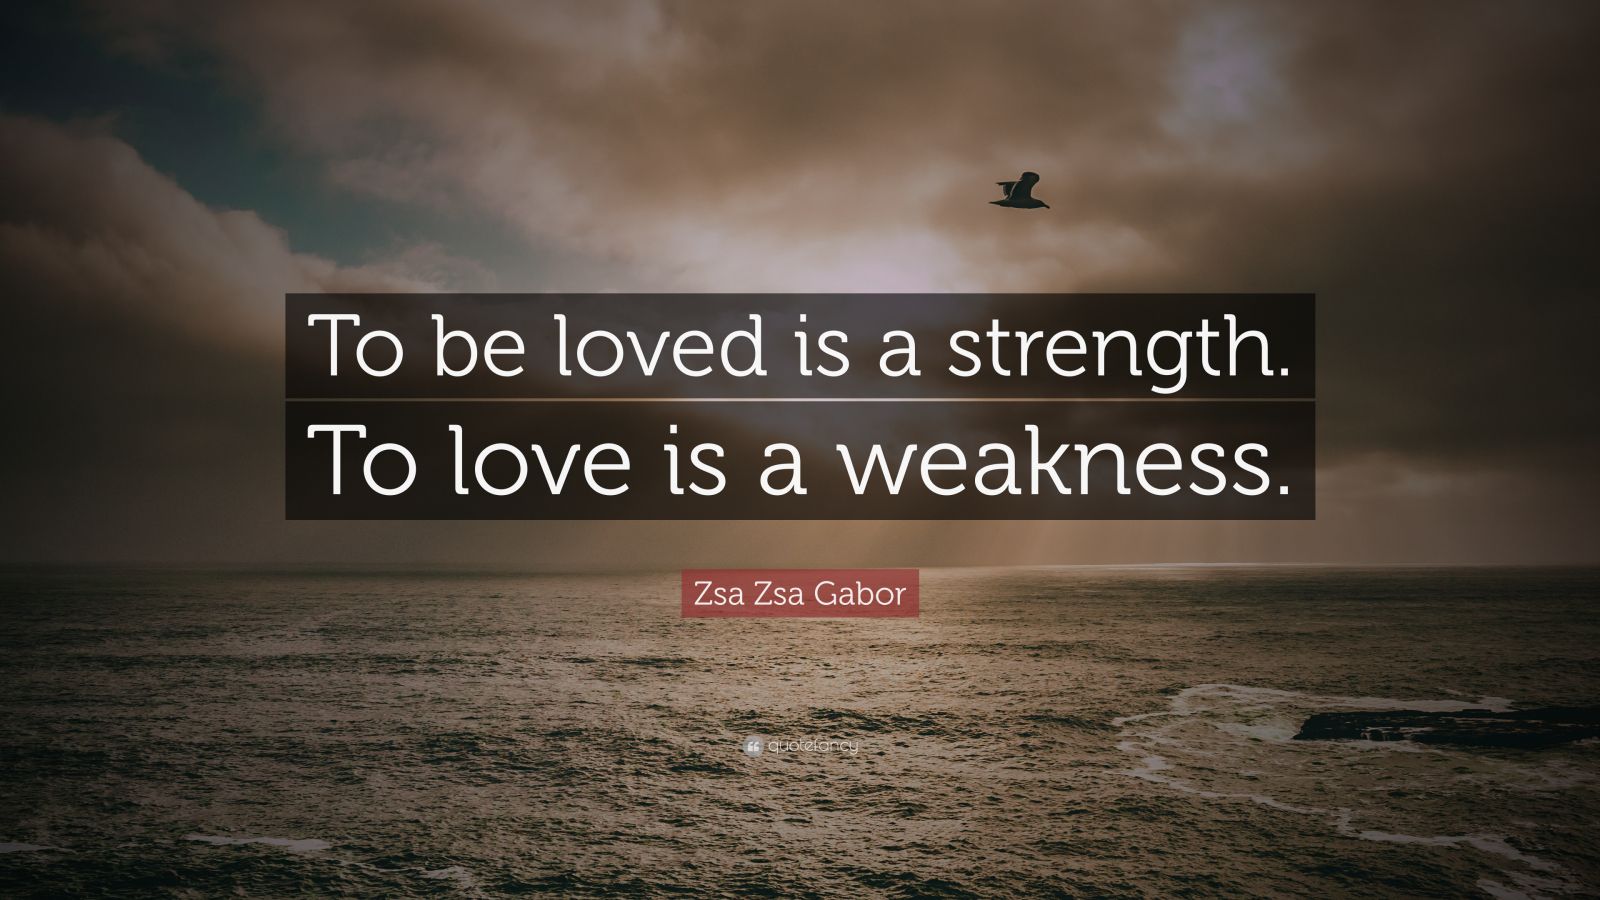 is love a weakness or strength